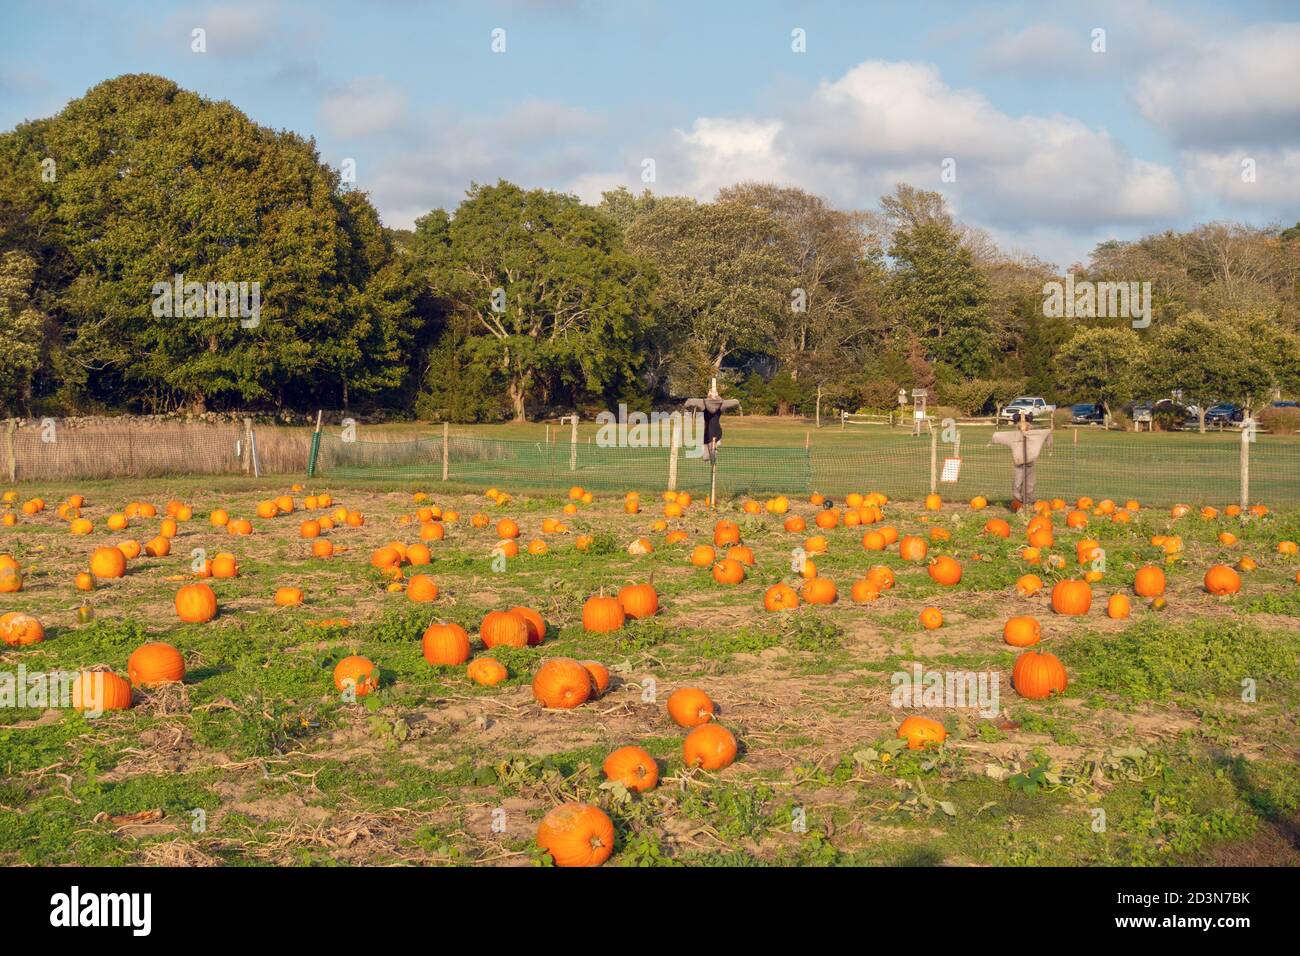 Field of Pumpkin plants in September at Bourne Farm, Falmouth, Cape Cod, Massachusetts in New England USA Stock Photo